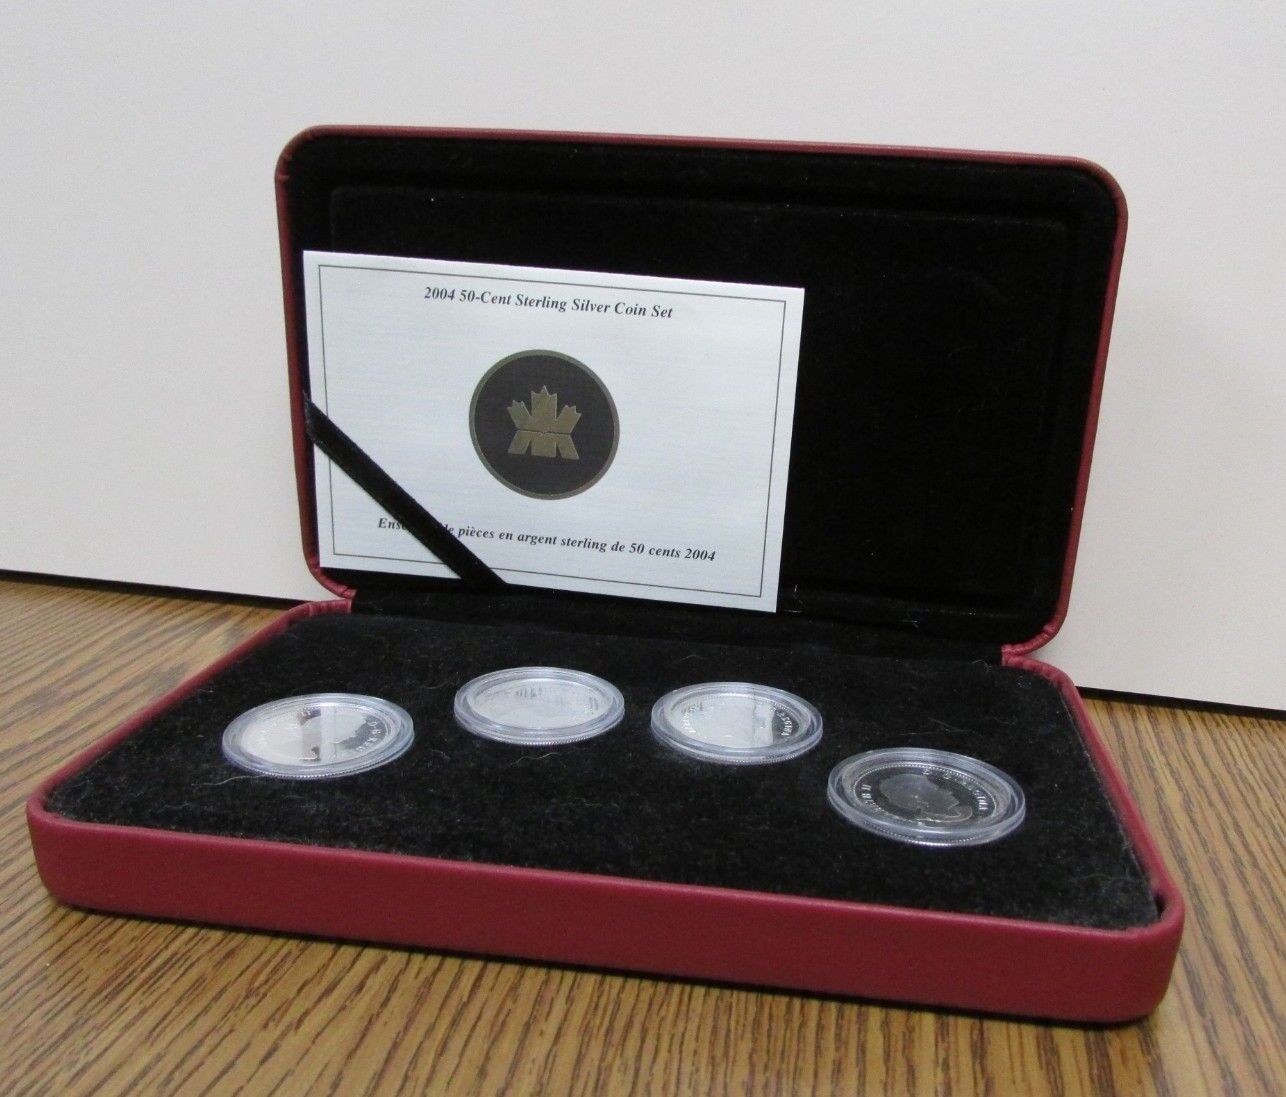 2004 50-Cent S.S. Coin Set (Expressions of Nationhood) - Royal Canadian Mint